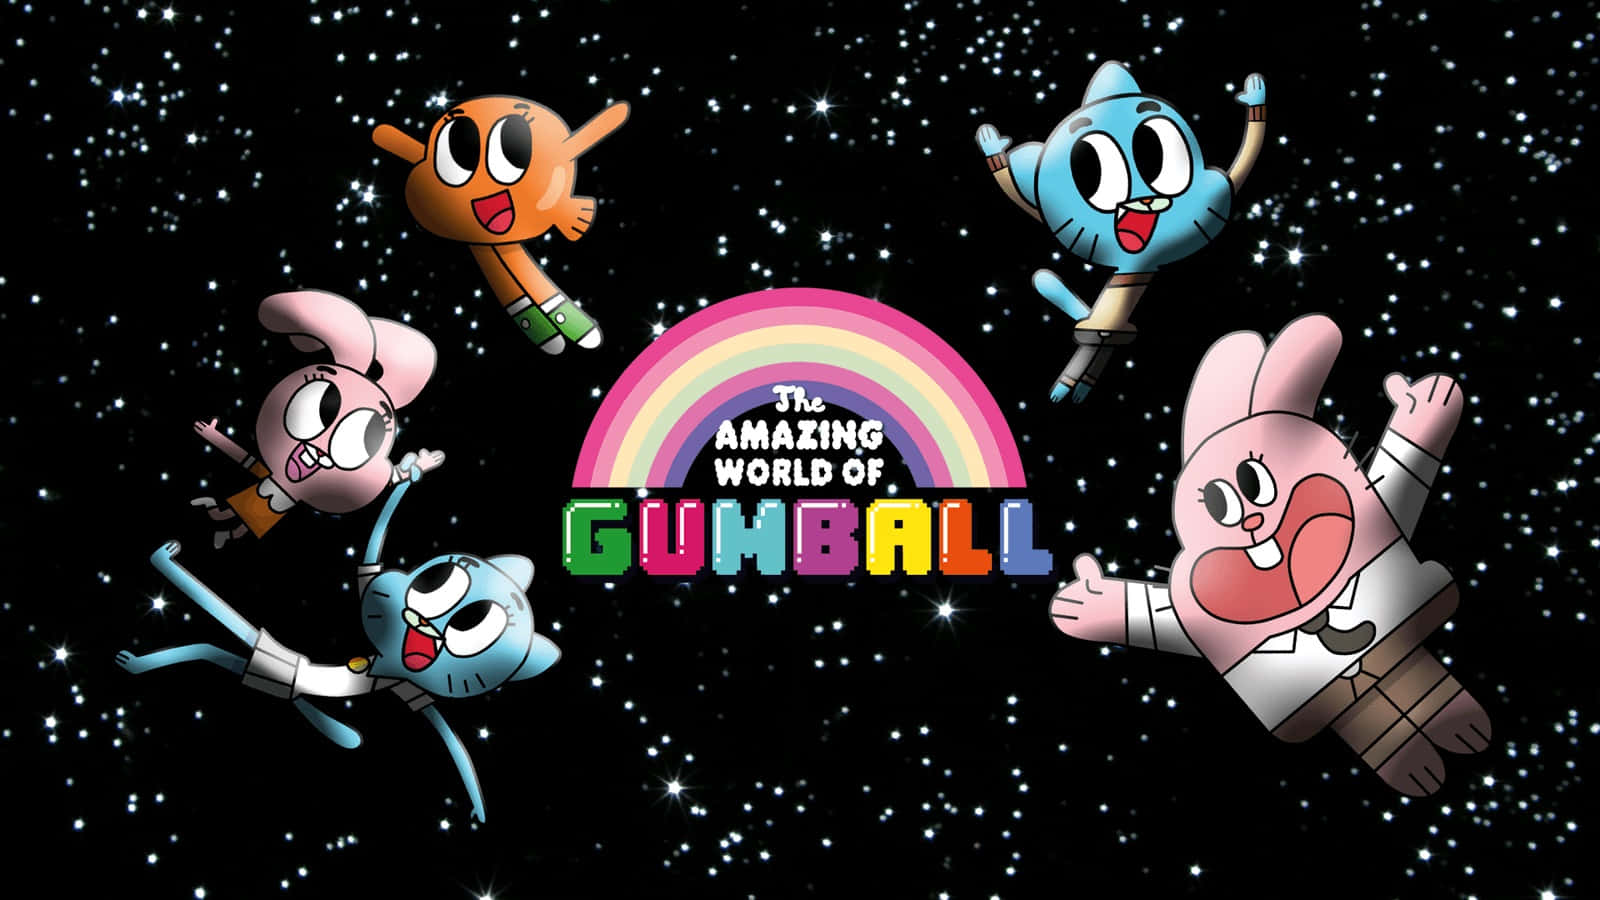 The lovable characters from The Amazing World of Gumball posing for a group photo Wallpaper